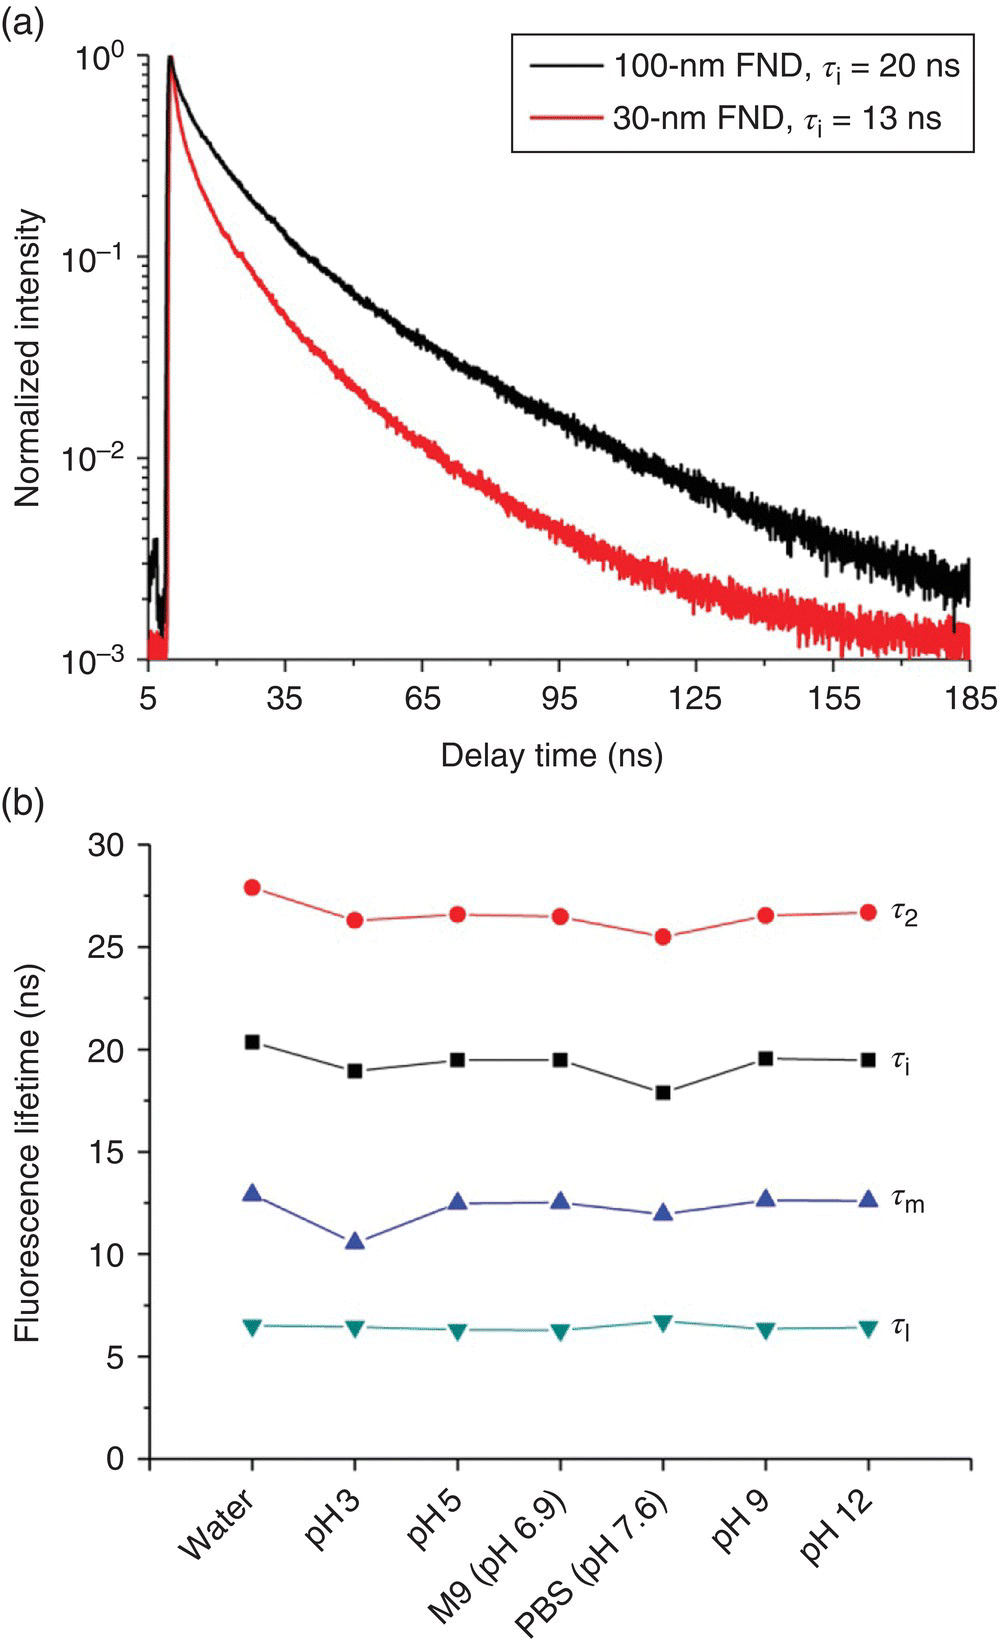 Top: Graph of normalized intensity vs. delay time displaying 2 intersecting ascending, descending curves for 100-nm FND (τi = 20 ns) and 30-nm FND (τi = 13 ns). Bottom: Graph displaying 4 parallel curves with markers.